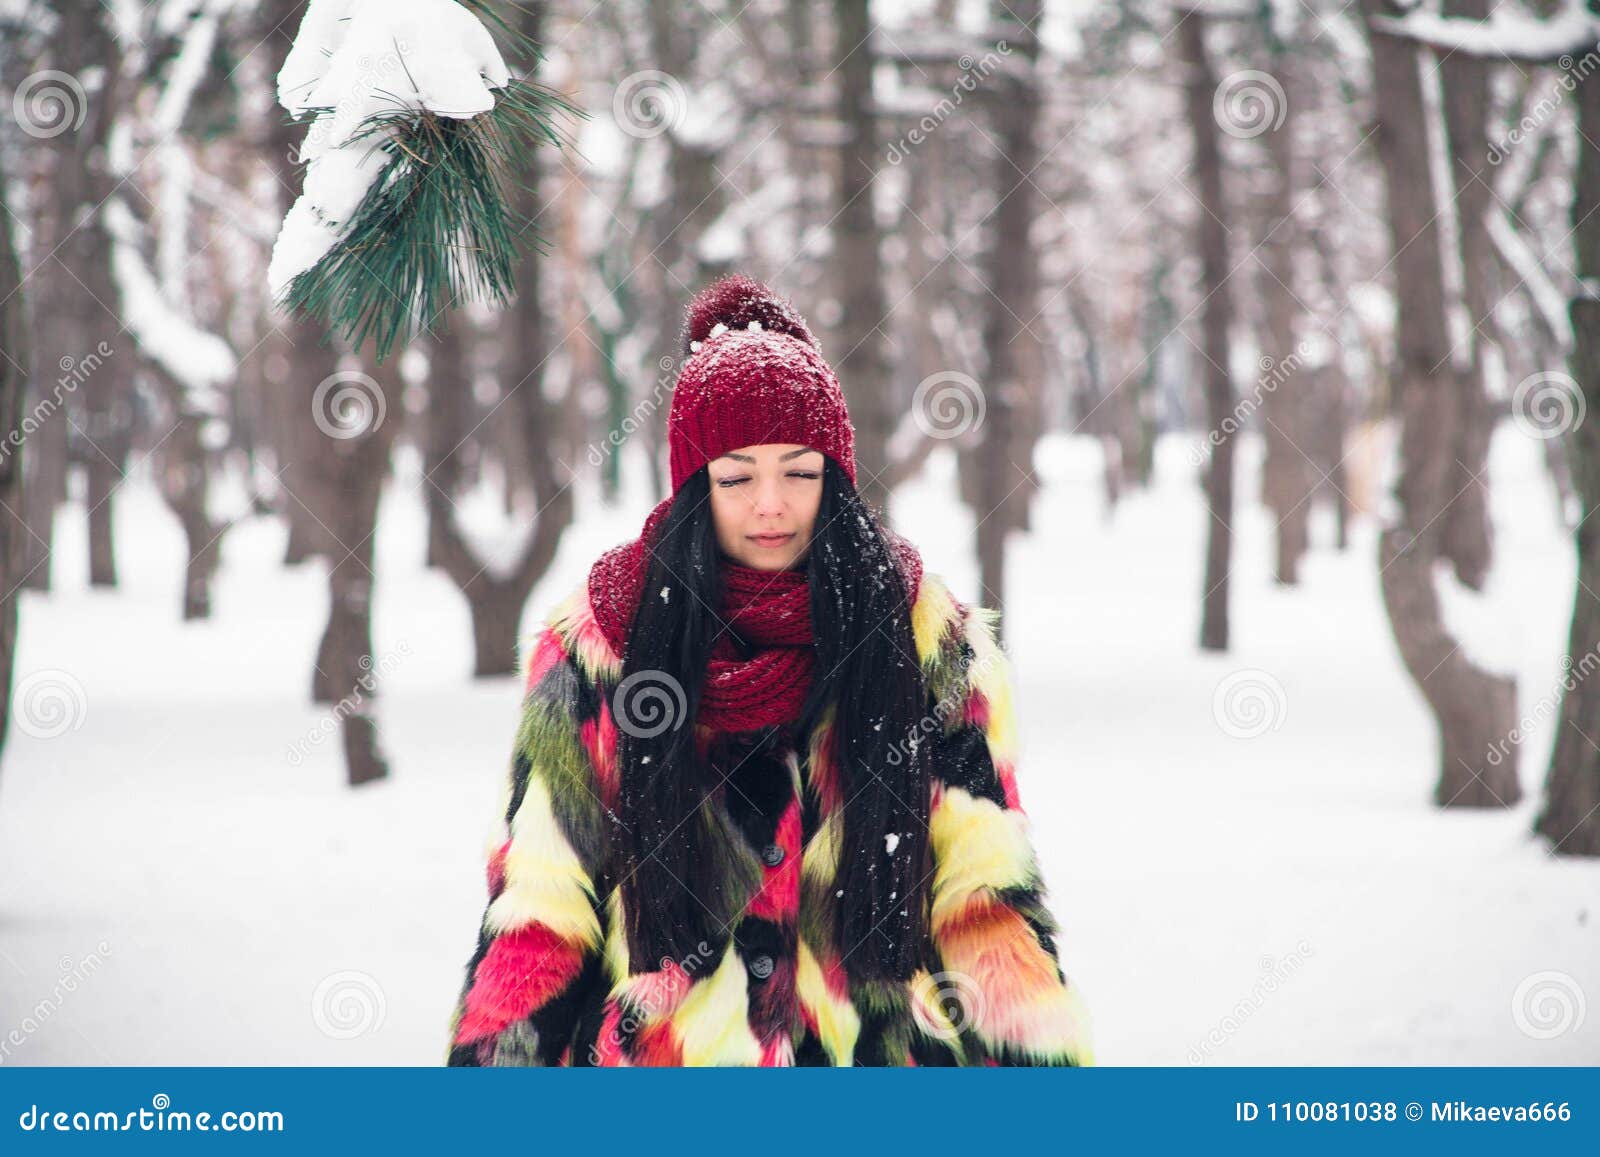 The Girl is Standing Under a Spruce Branch Stock Photo - Image of ...